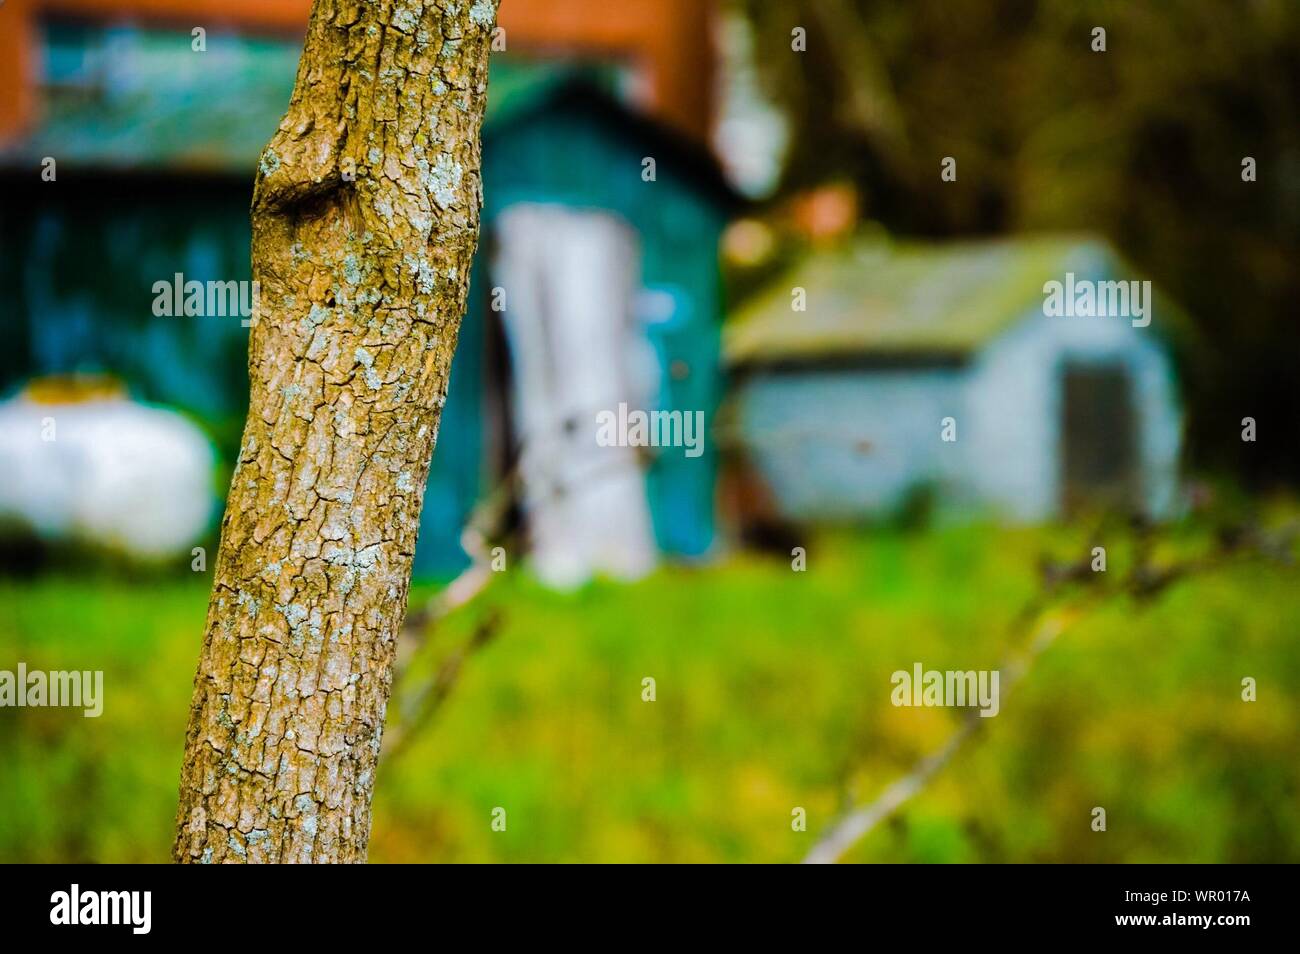 Close-up Of Tree Trunk Against Built Structures Stock Photo